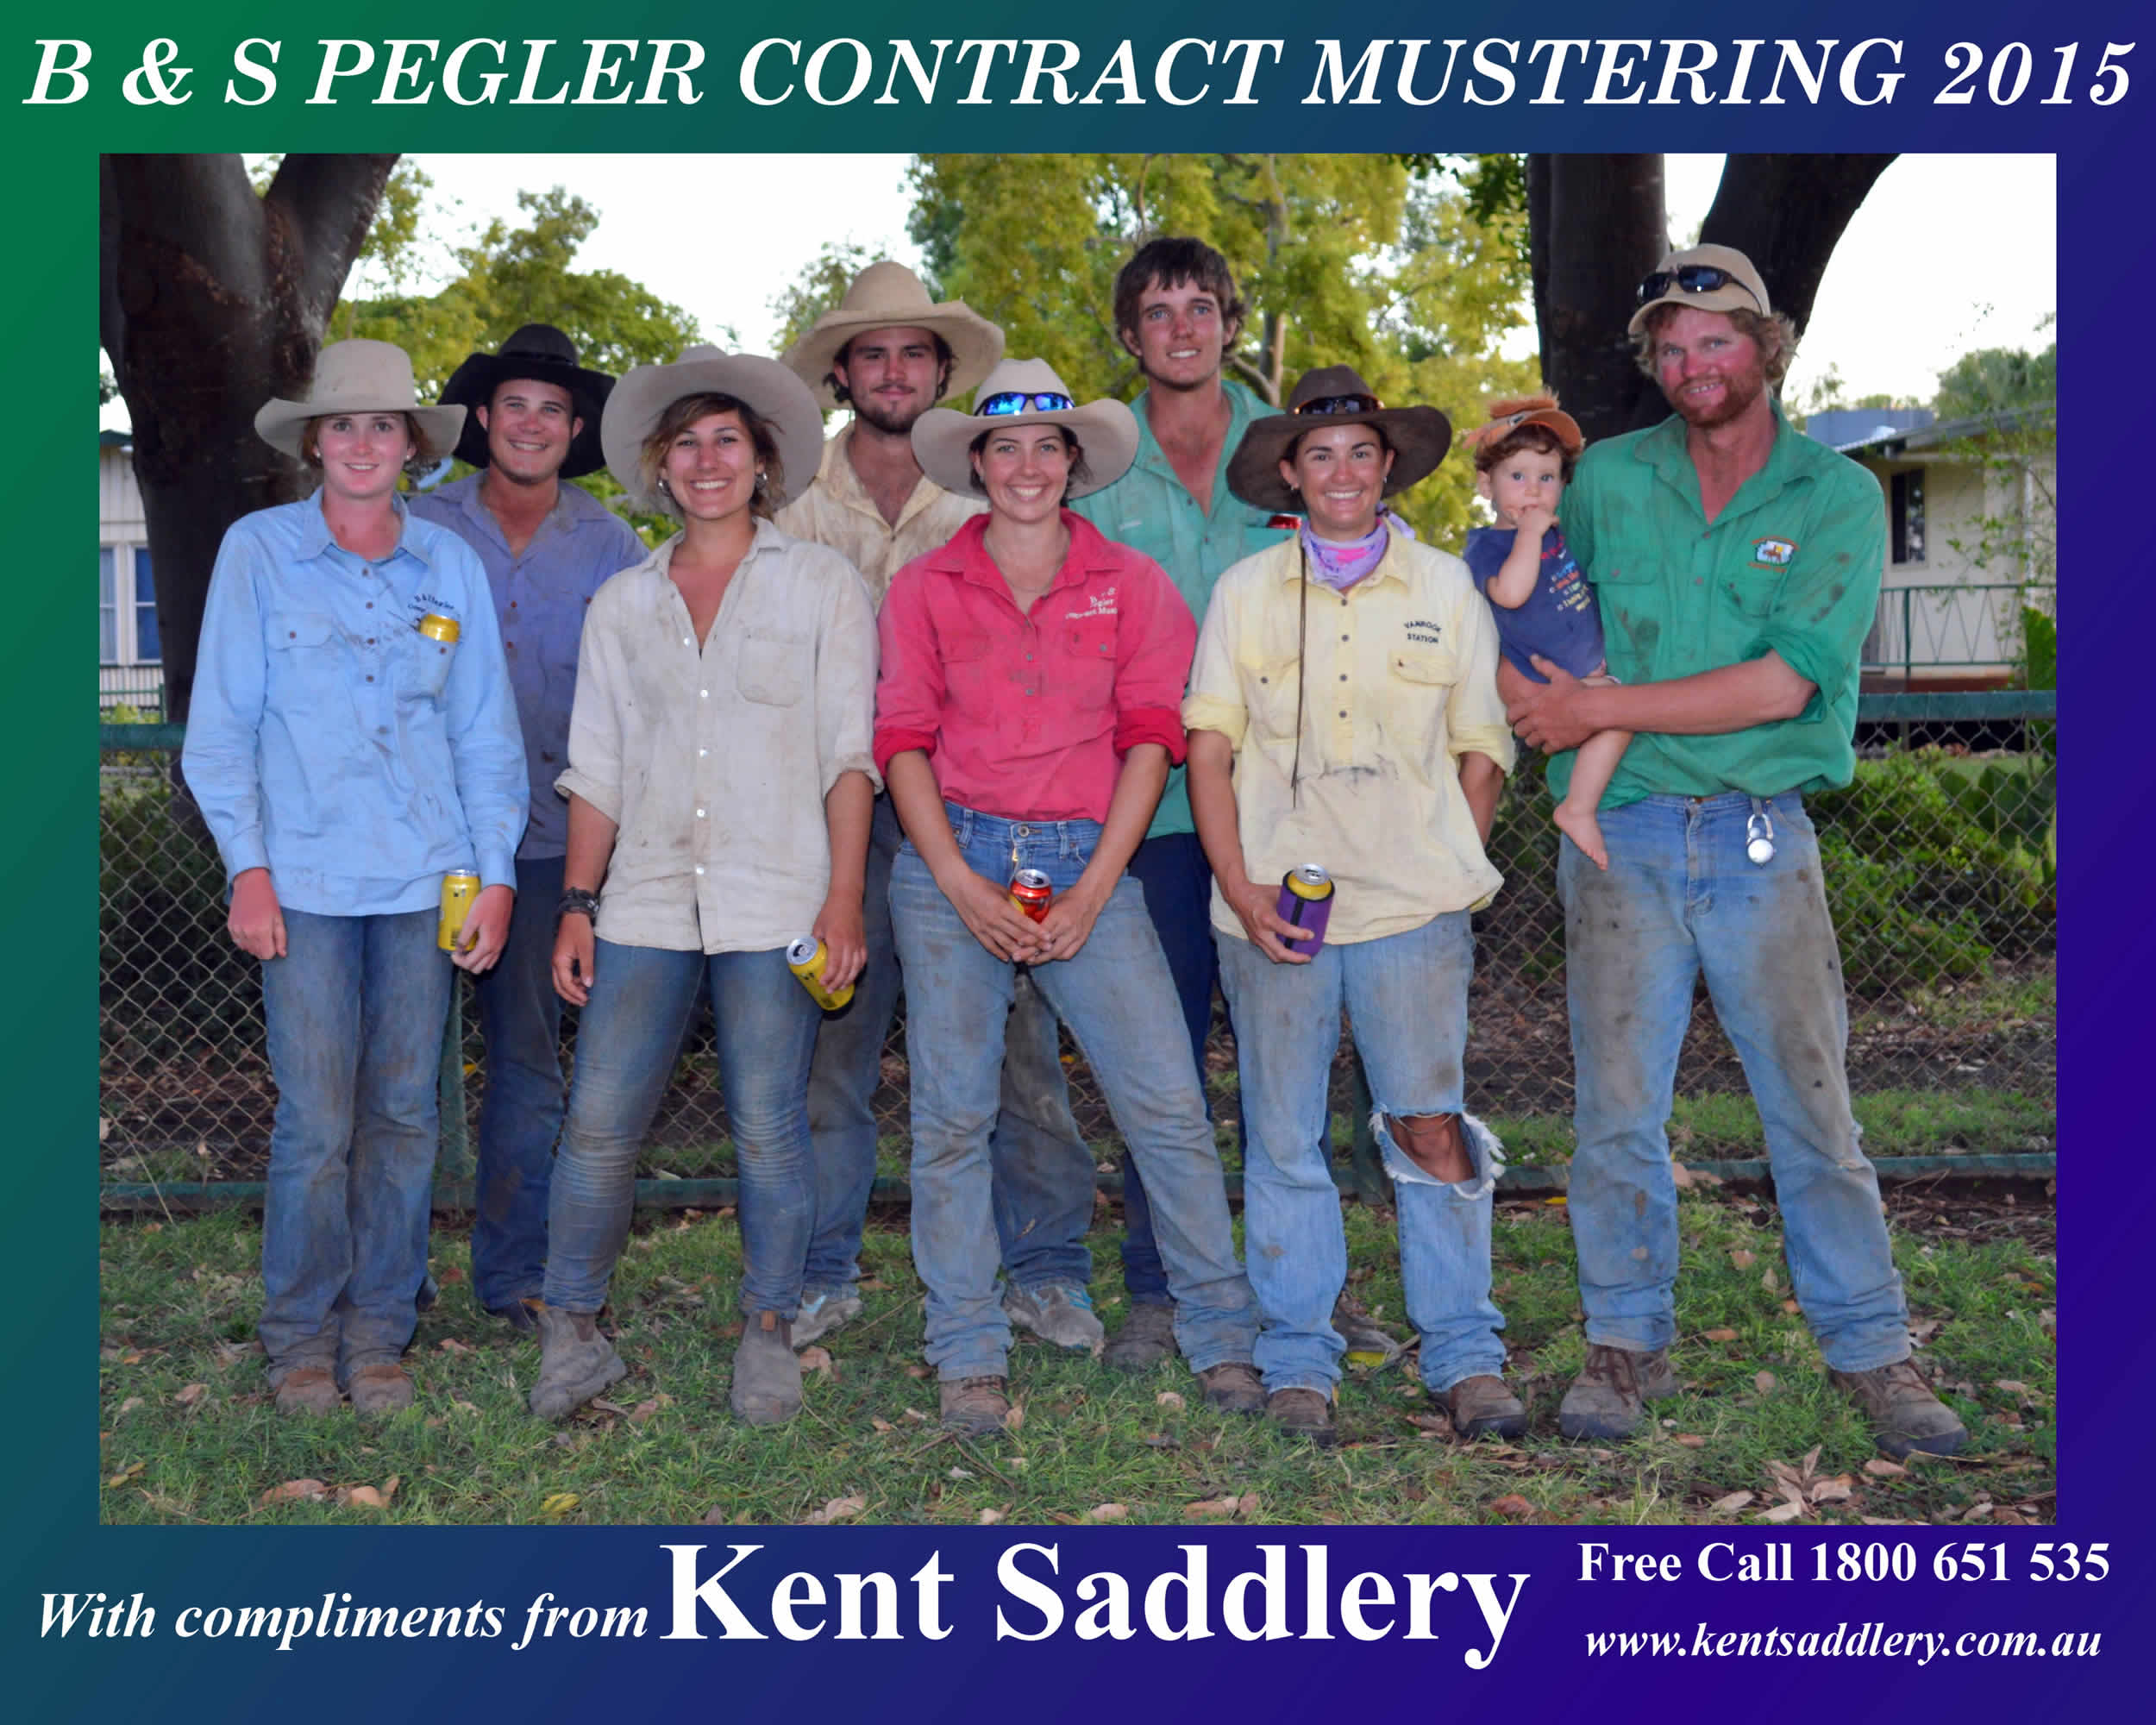 Drovers & Contractors - B & S Contract Mustering 5